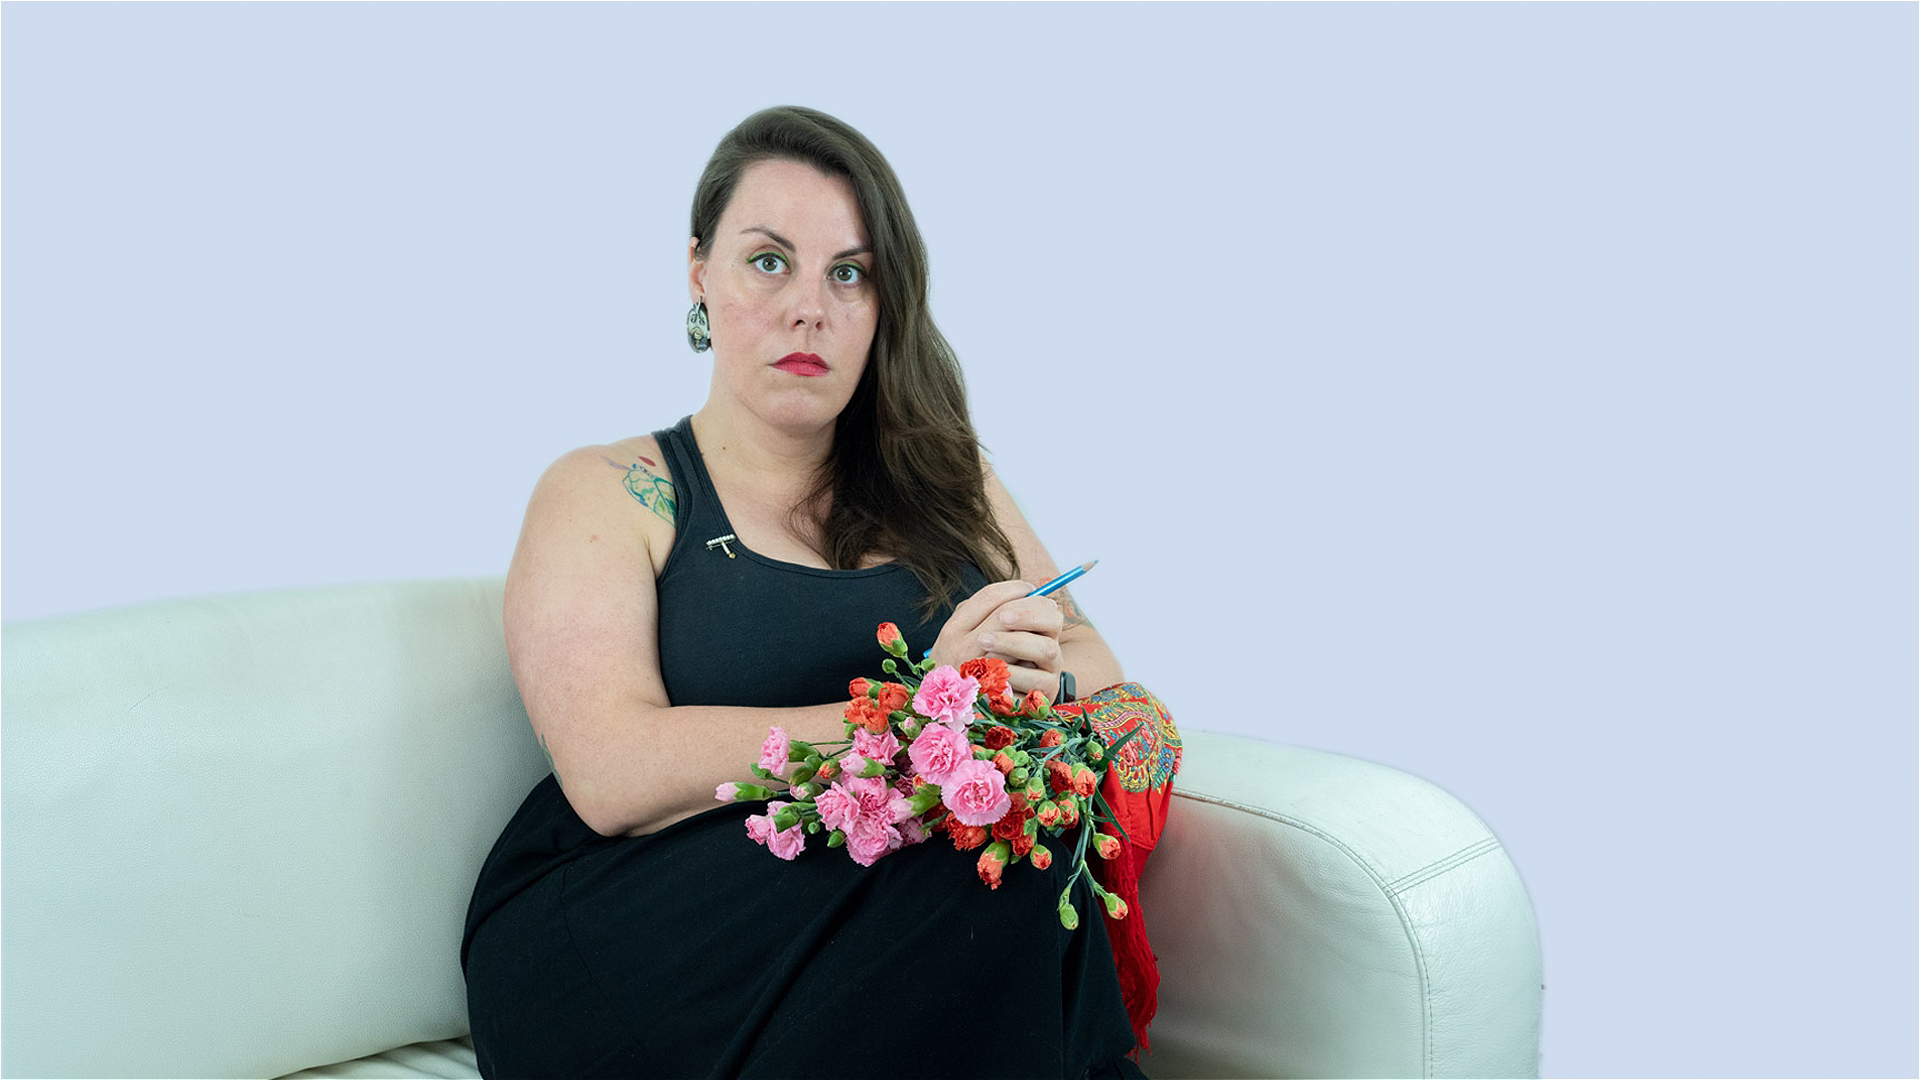 Mariana holding a bouquet of pink and red carnations, held together by a Viana do Castelo traditional scarf and a blue pencil. Mariana is wearing black clothes, a cross brooch, and an earring representing António Variações. They are wearing green eye shadow and red lipstick.